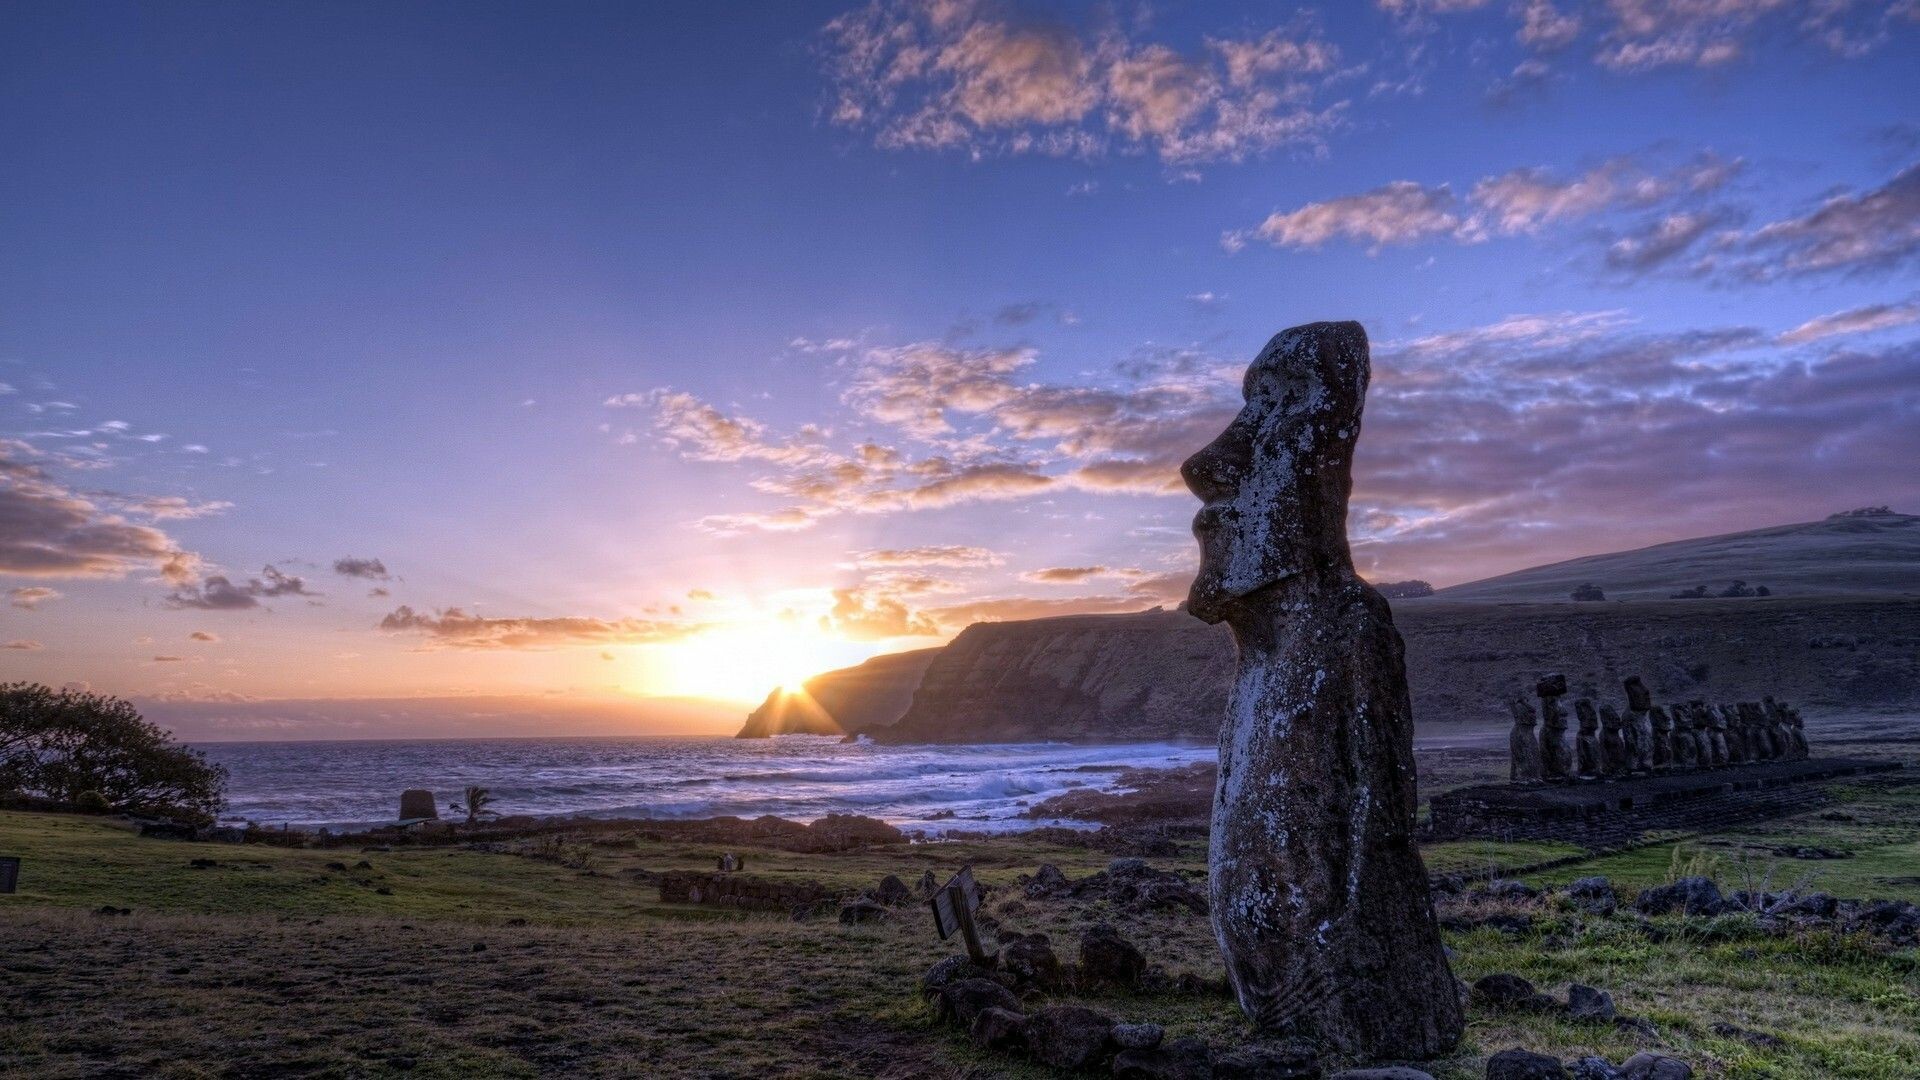 Moai: Almost all statues have overly large heads three-eighths the size of the whole statue. 1920x1080 Full HD Wallpaper.